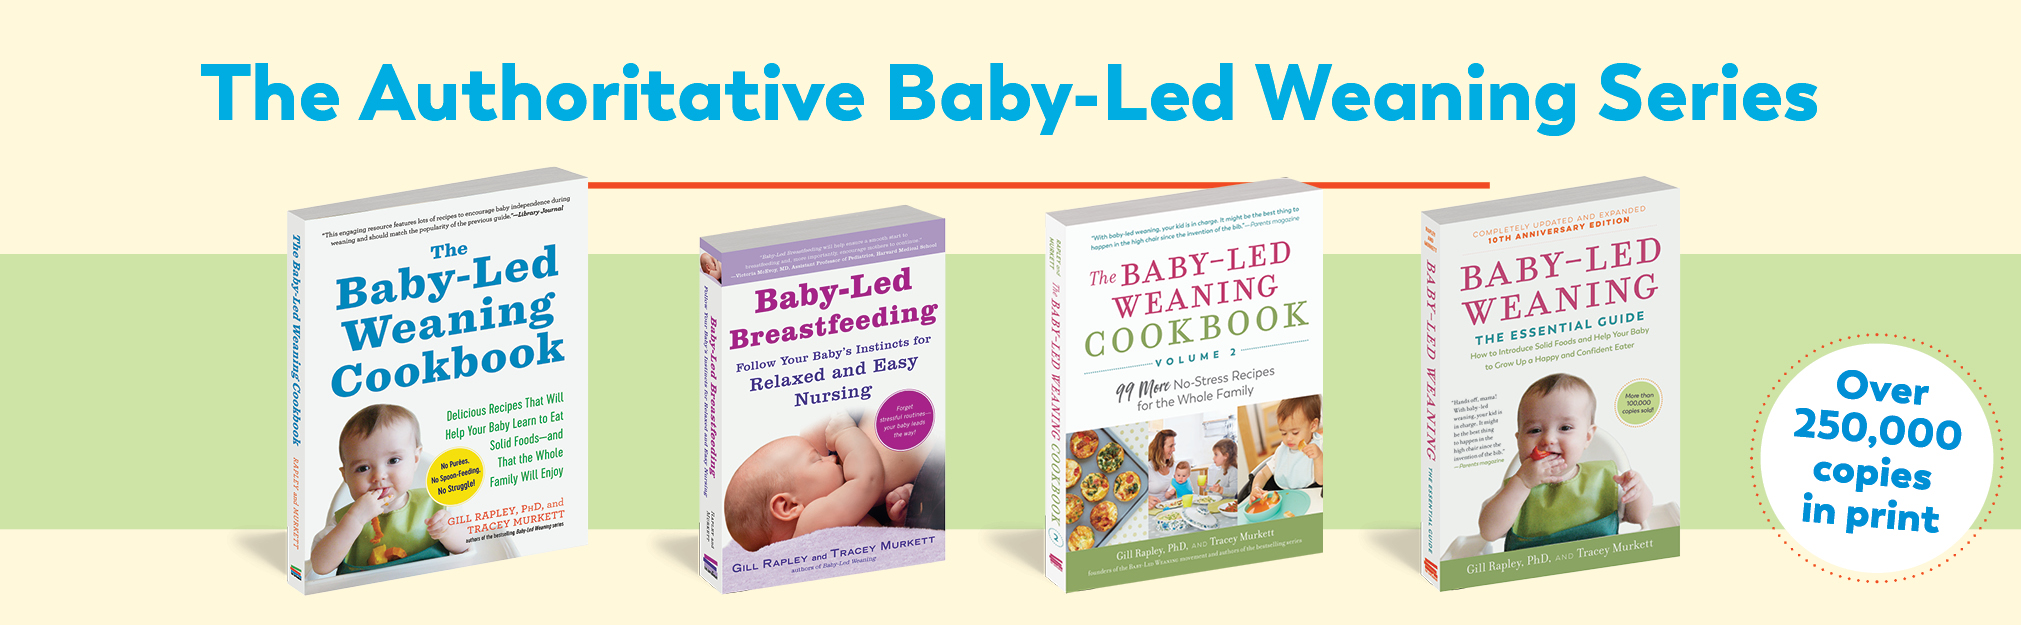 The Baby-Led Weaning Cookbook: Delicious Recipes That Will Help Your Baby  Learn to Eat Solid Foods―and That the Whole Family Will Enjoy (The